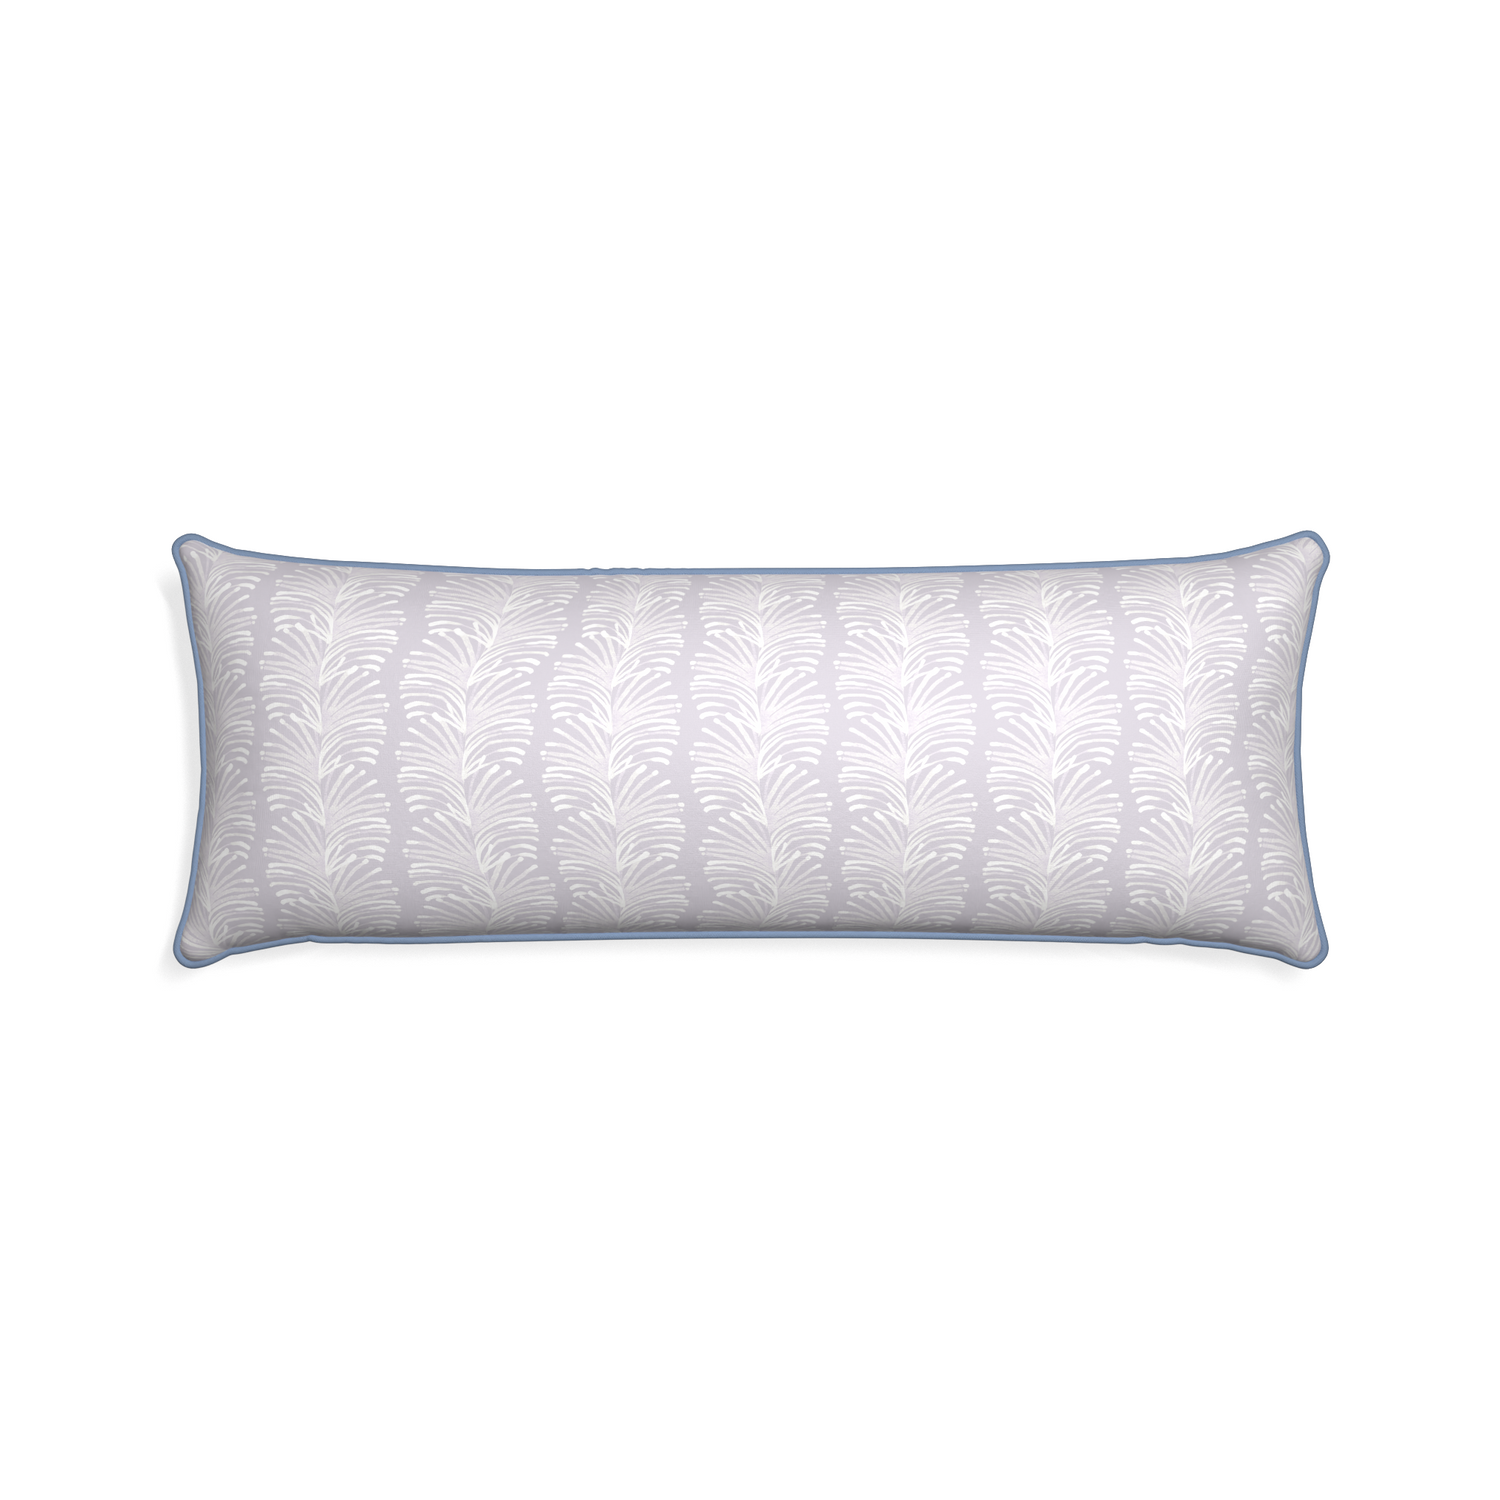 Xl-lumbar emma lavender custom pillow with sky piping on white background